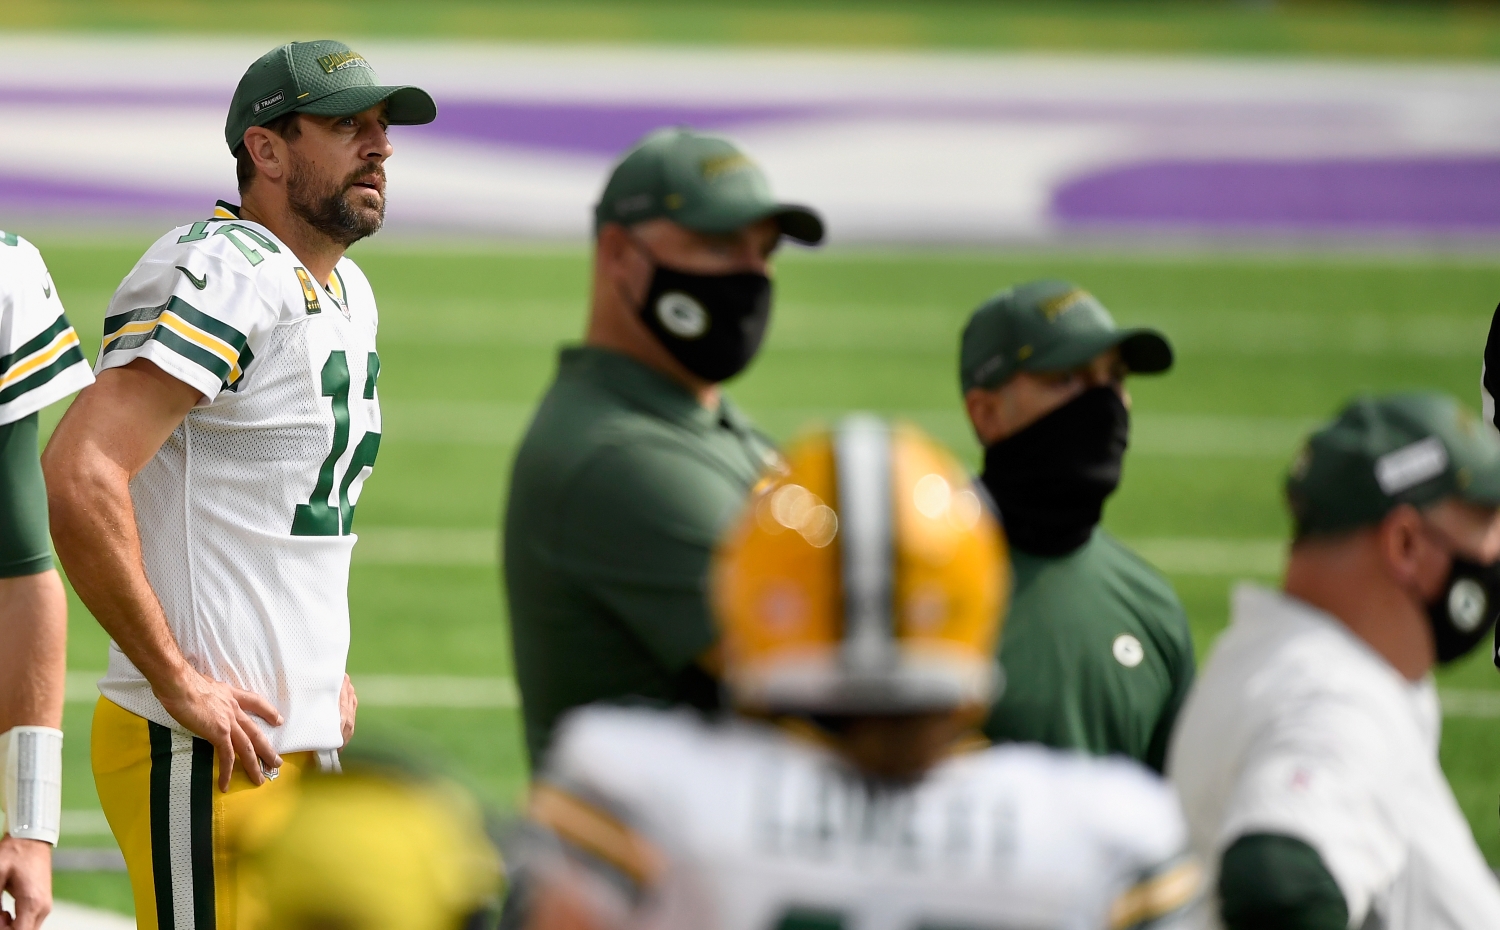 Green Bay Packers quarterback Aaron Rodgers stands on the sidelines during a game.